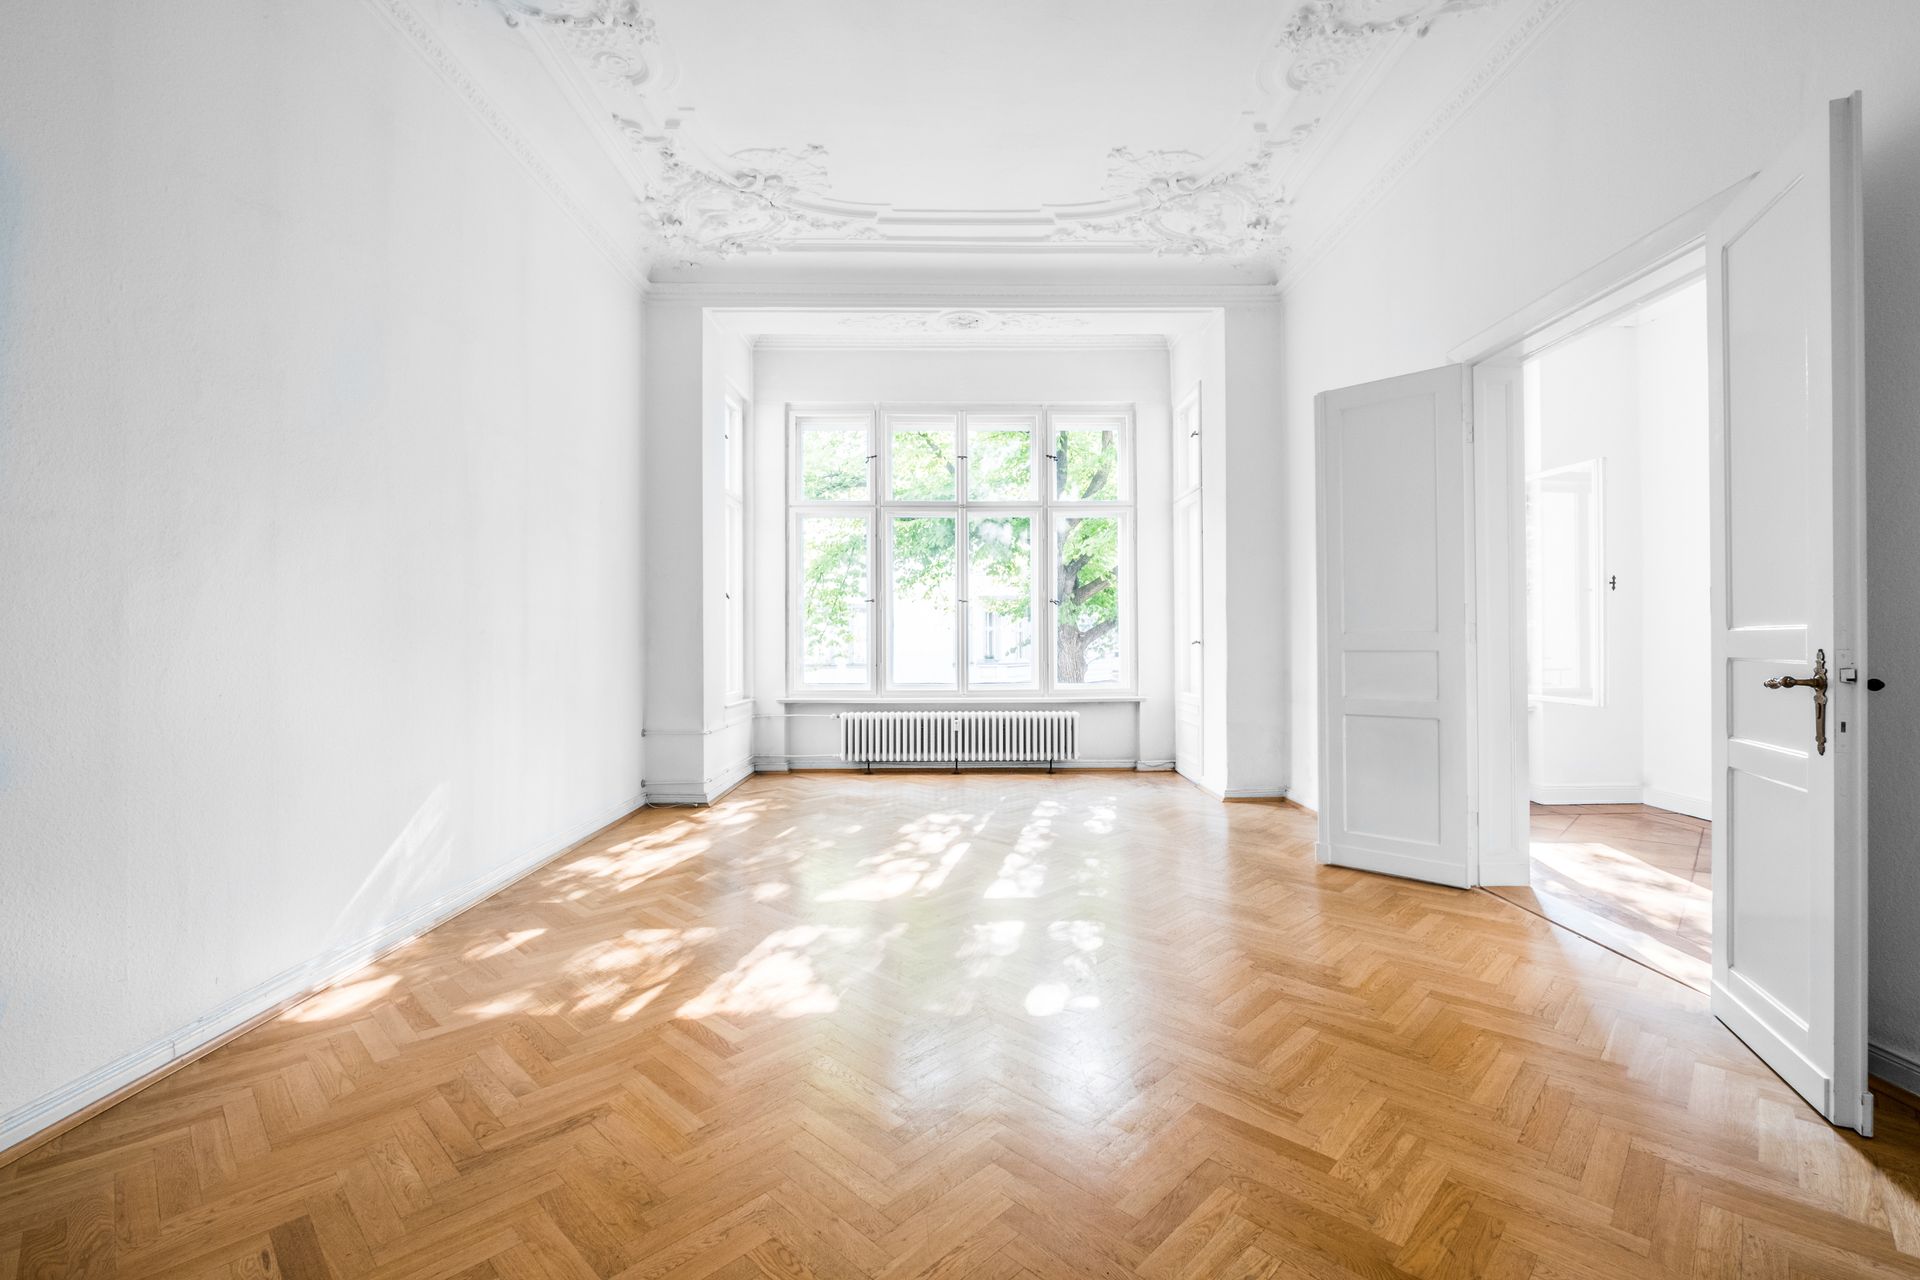 An empty living room with a wooden floor and white walls.